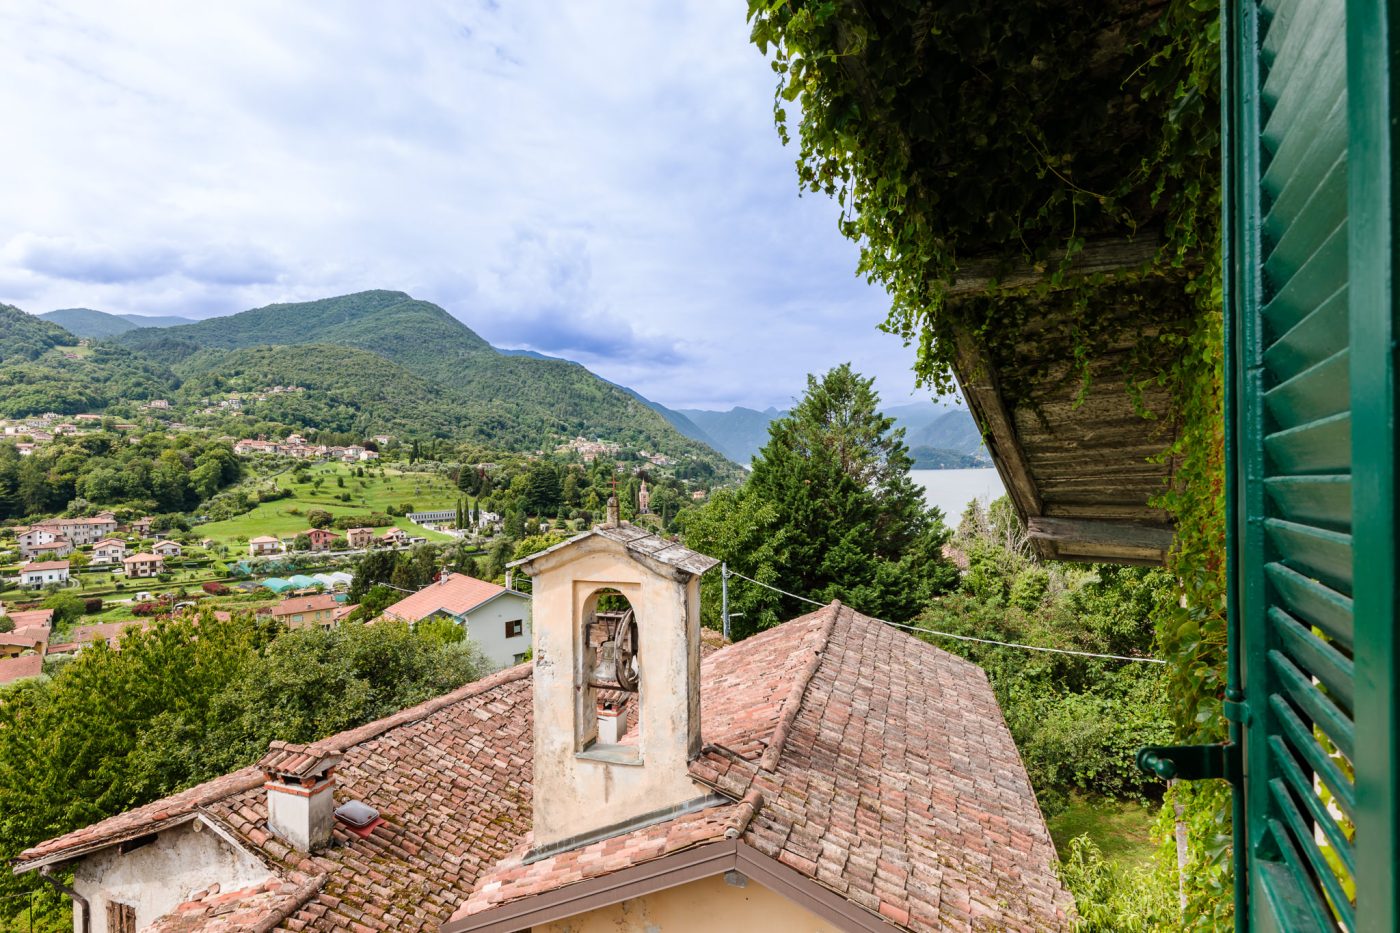 Ancient house with garden in Bellagio